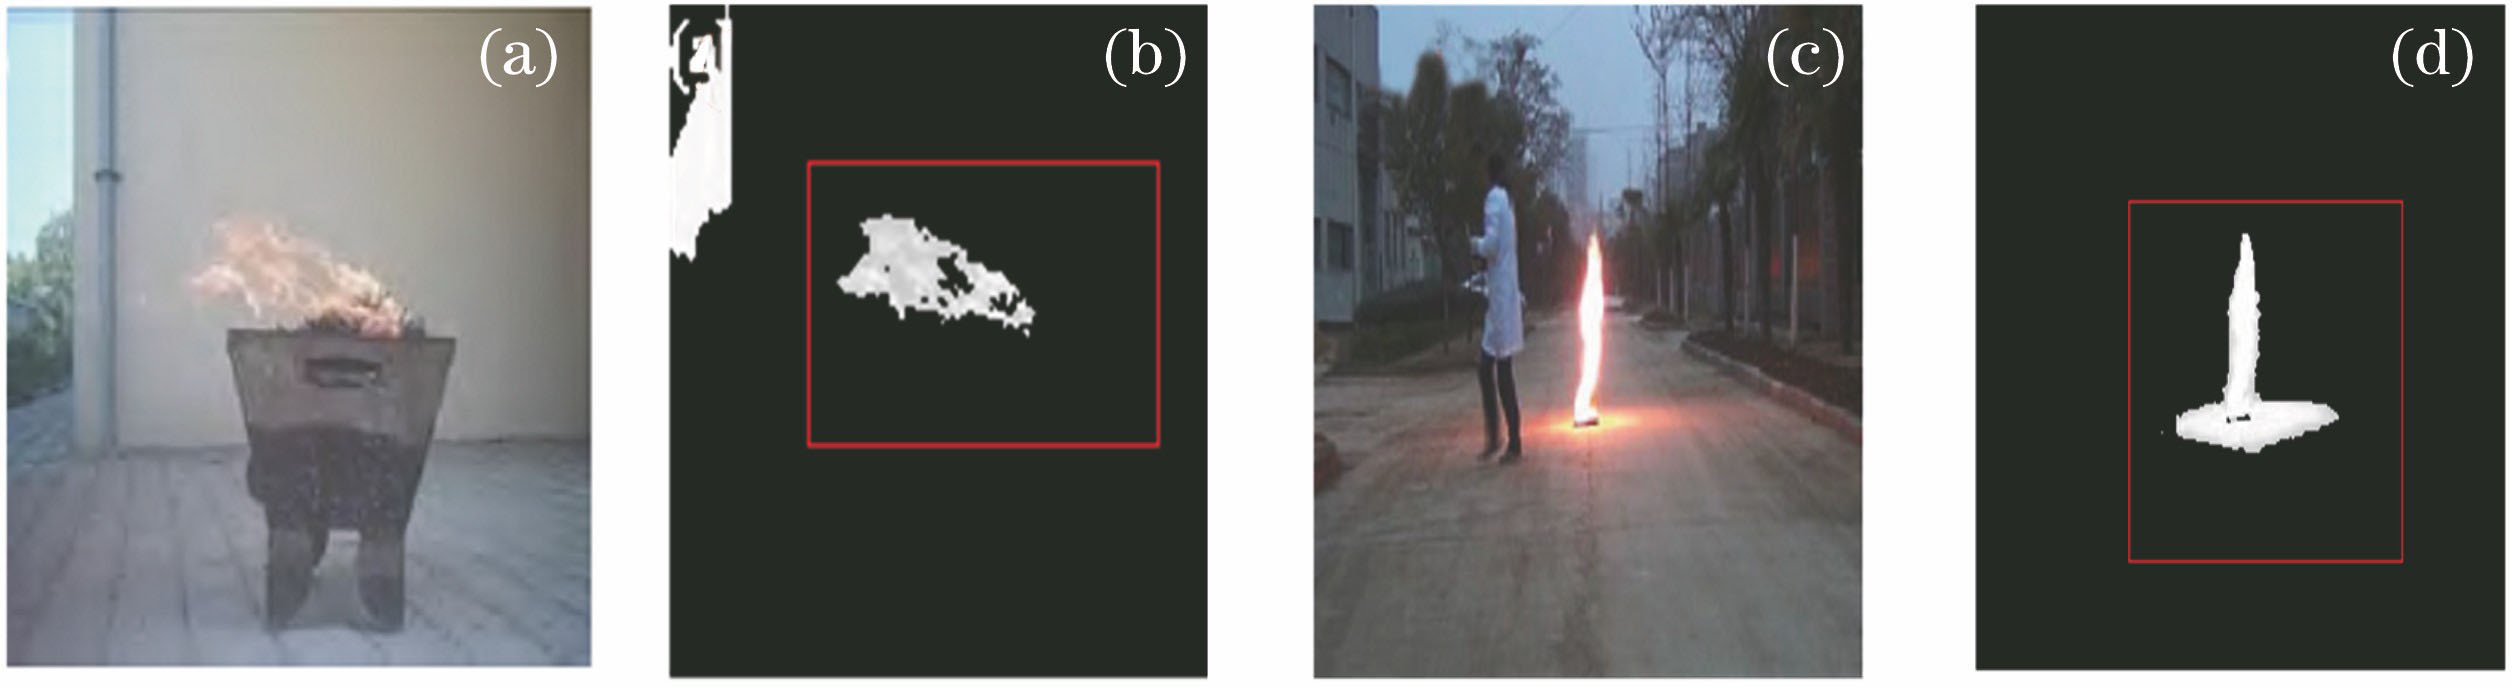 Flame images with different brightness. (a)(c) Original images; (b) (d) brightness images of actual flame